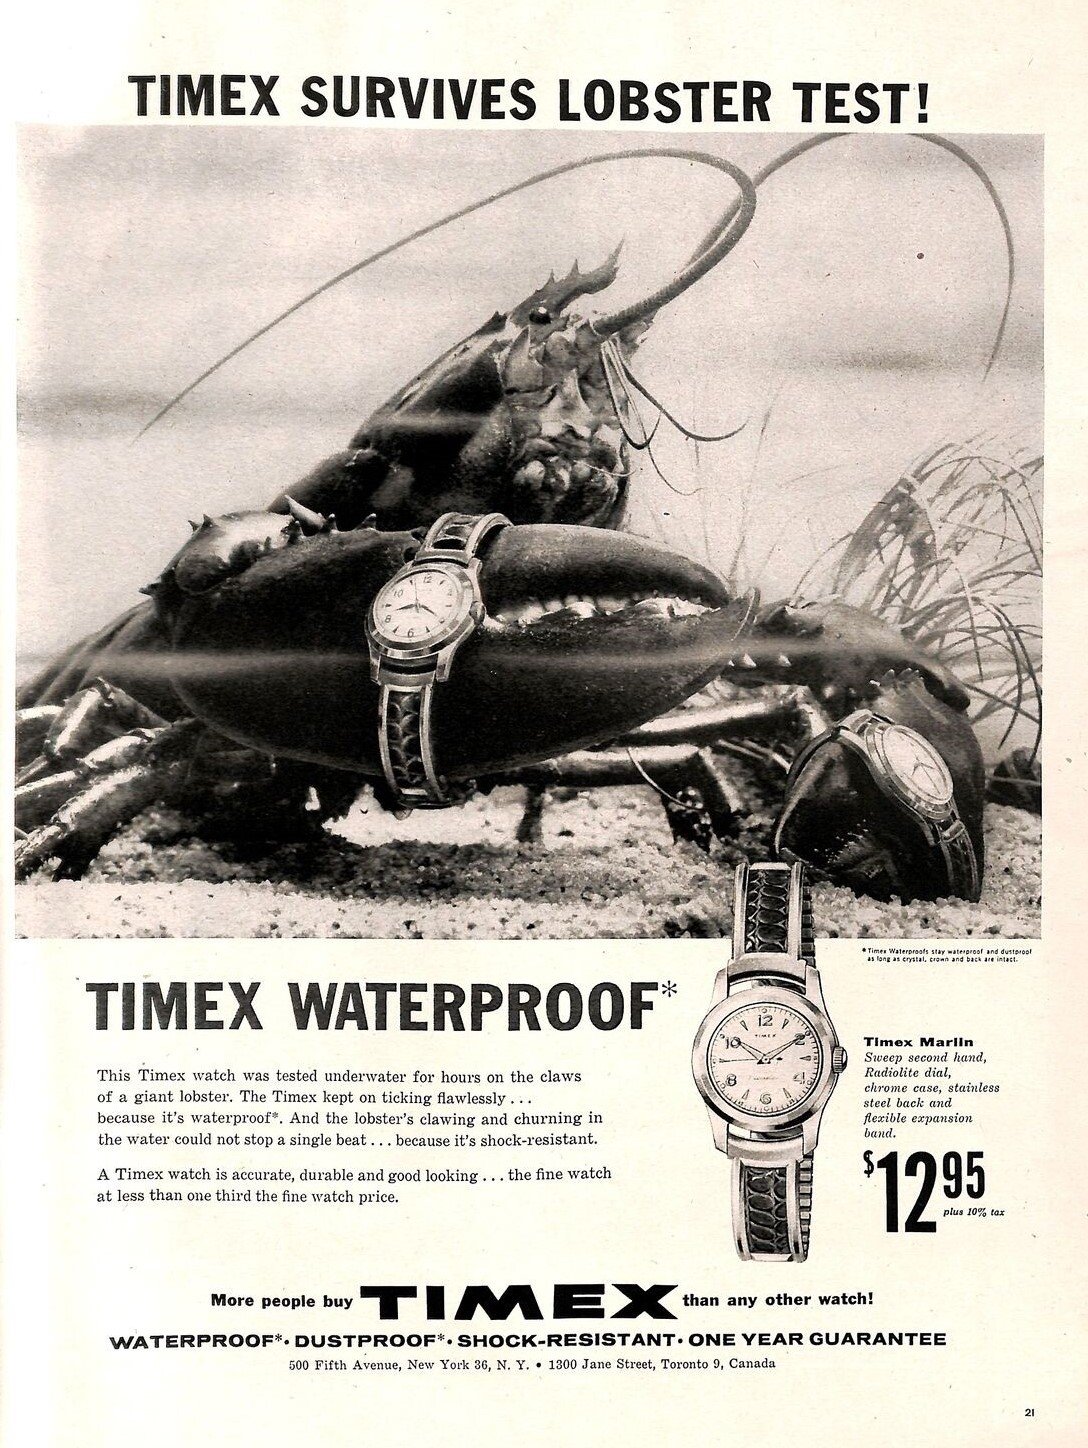 THE TIMEX TORTURE TESTS OF THE 1950s - Montres Publiques - The vintage  watch magazine